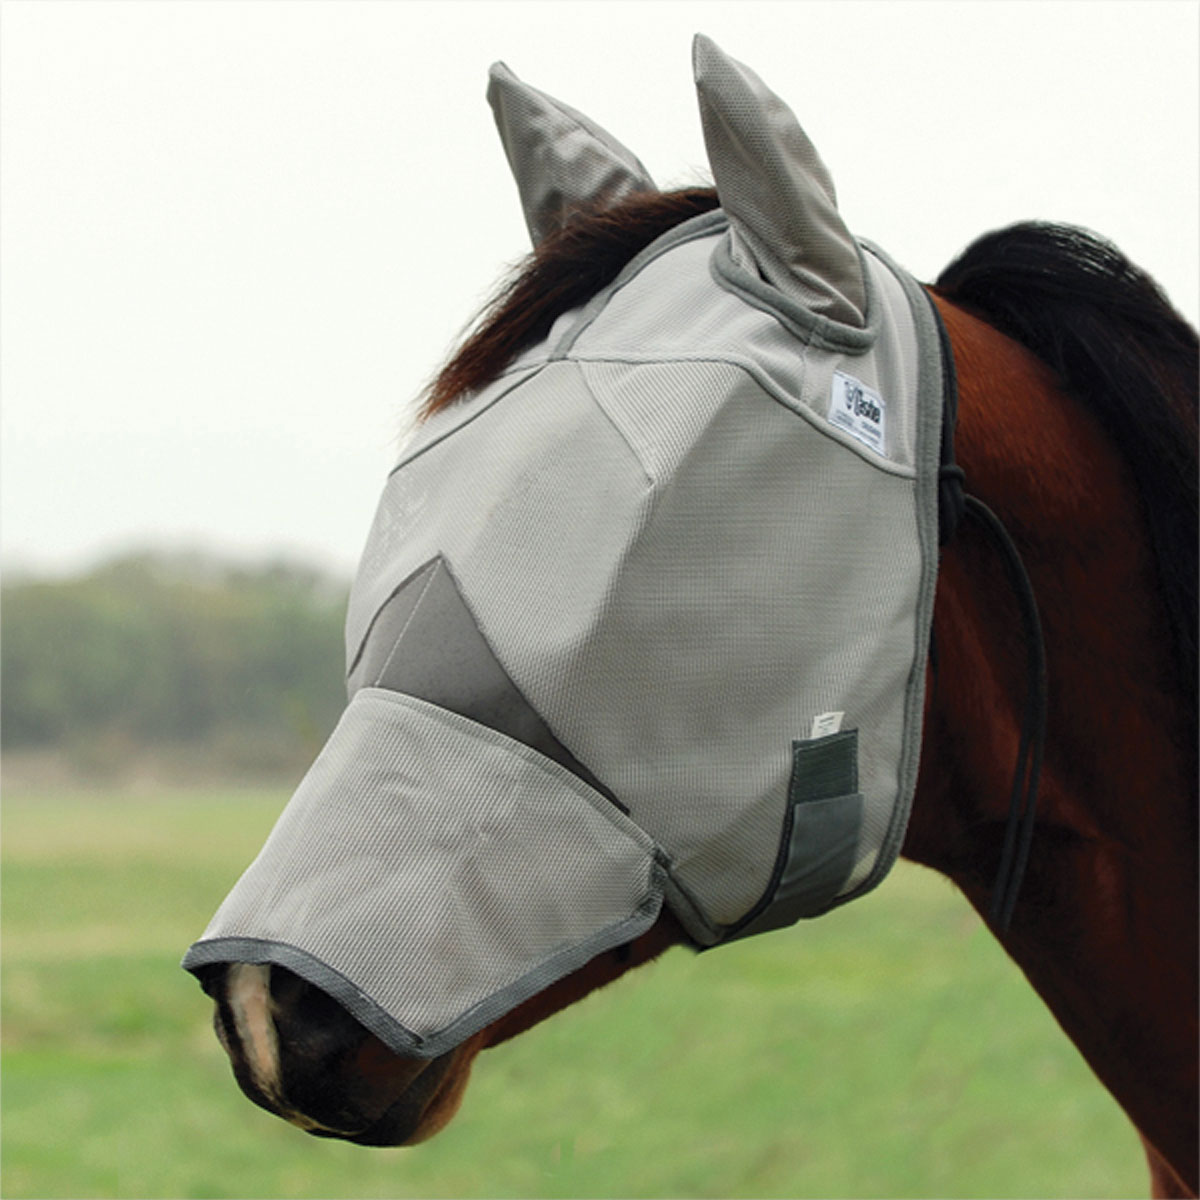 Horse Fly Mask Comfortable Breathable Horse Mask With Ear Anti Mosquito Horse Ma 